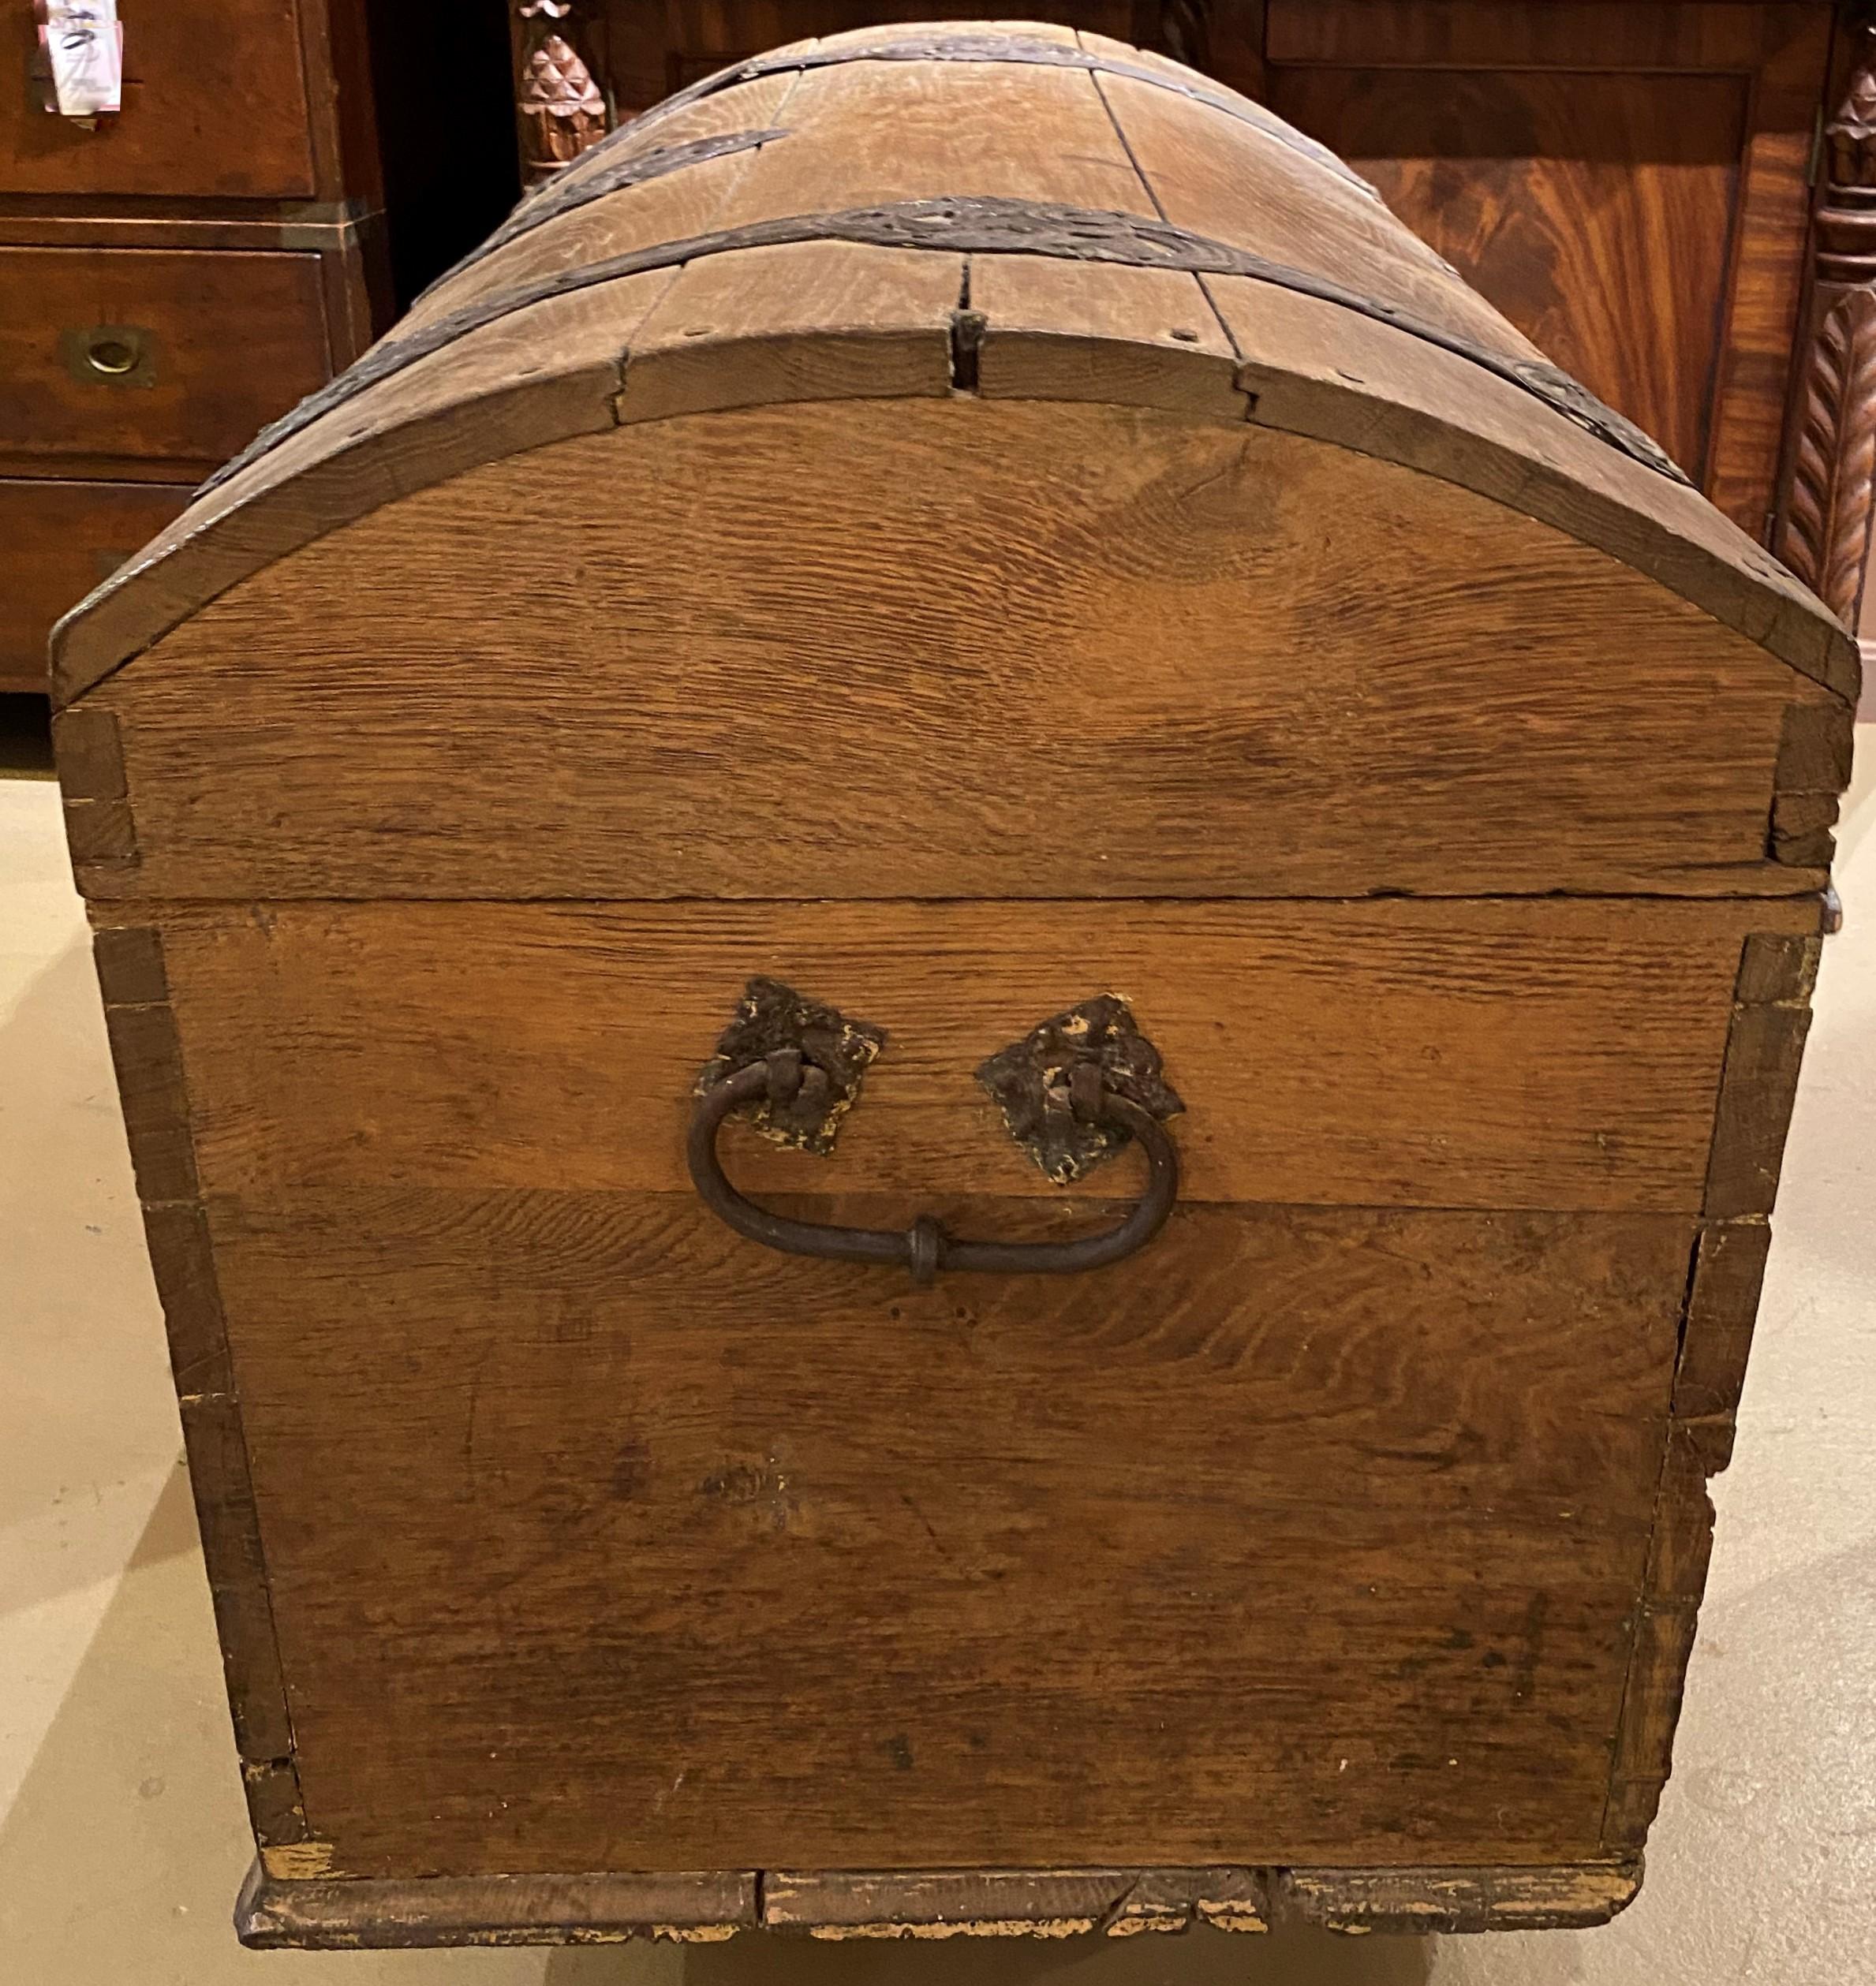 Hand-Carved 18th Century Continental Oak Dome Top Trunk with Fabulous Metalwork